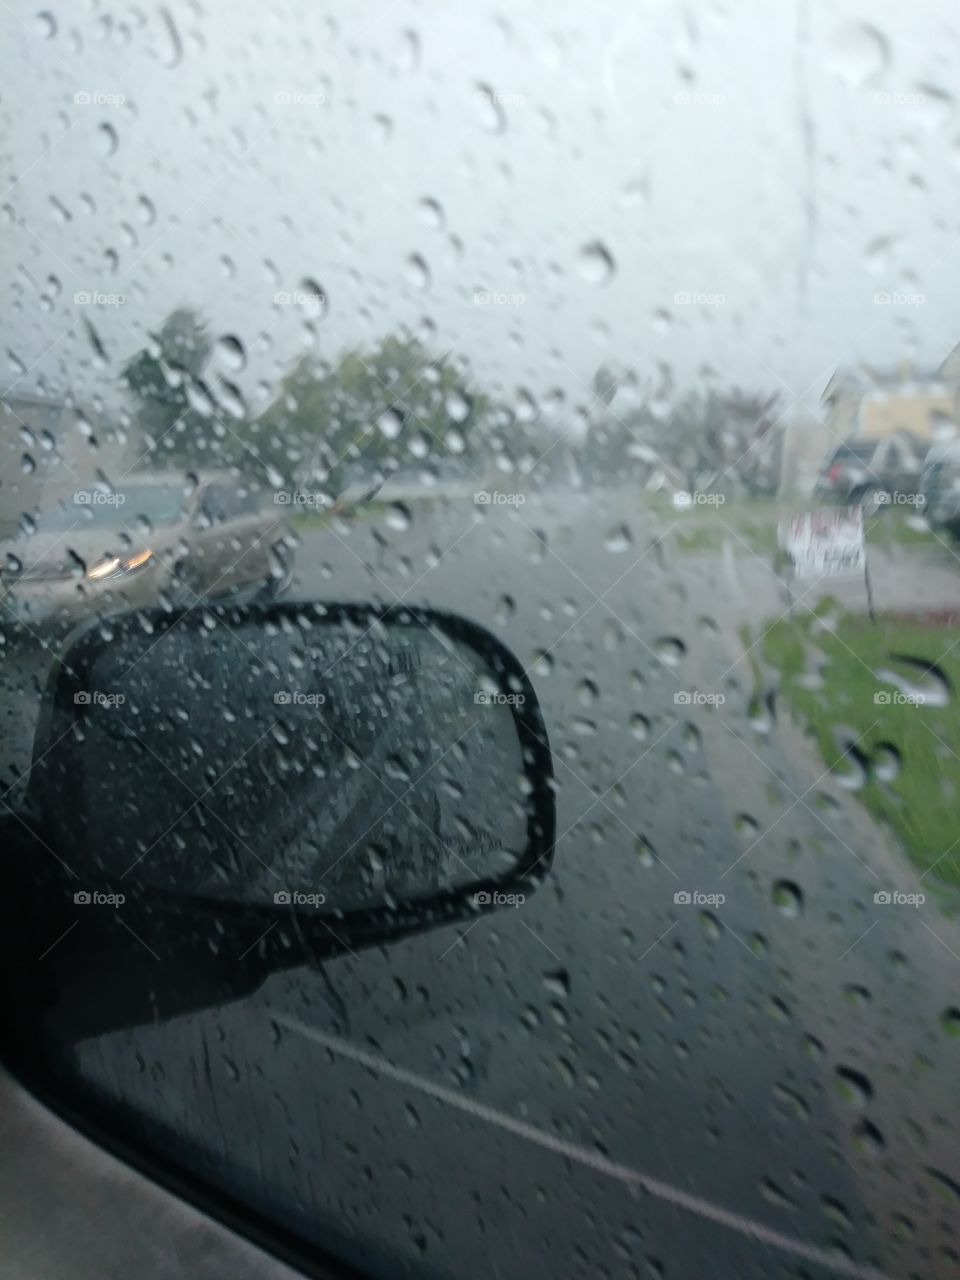 Rainy Day On The Road